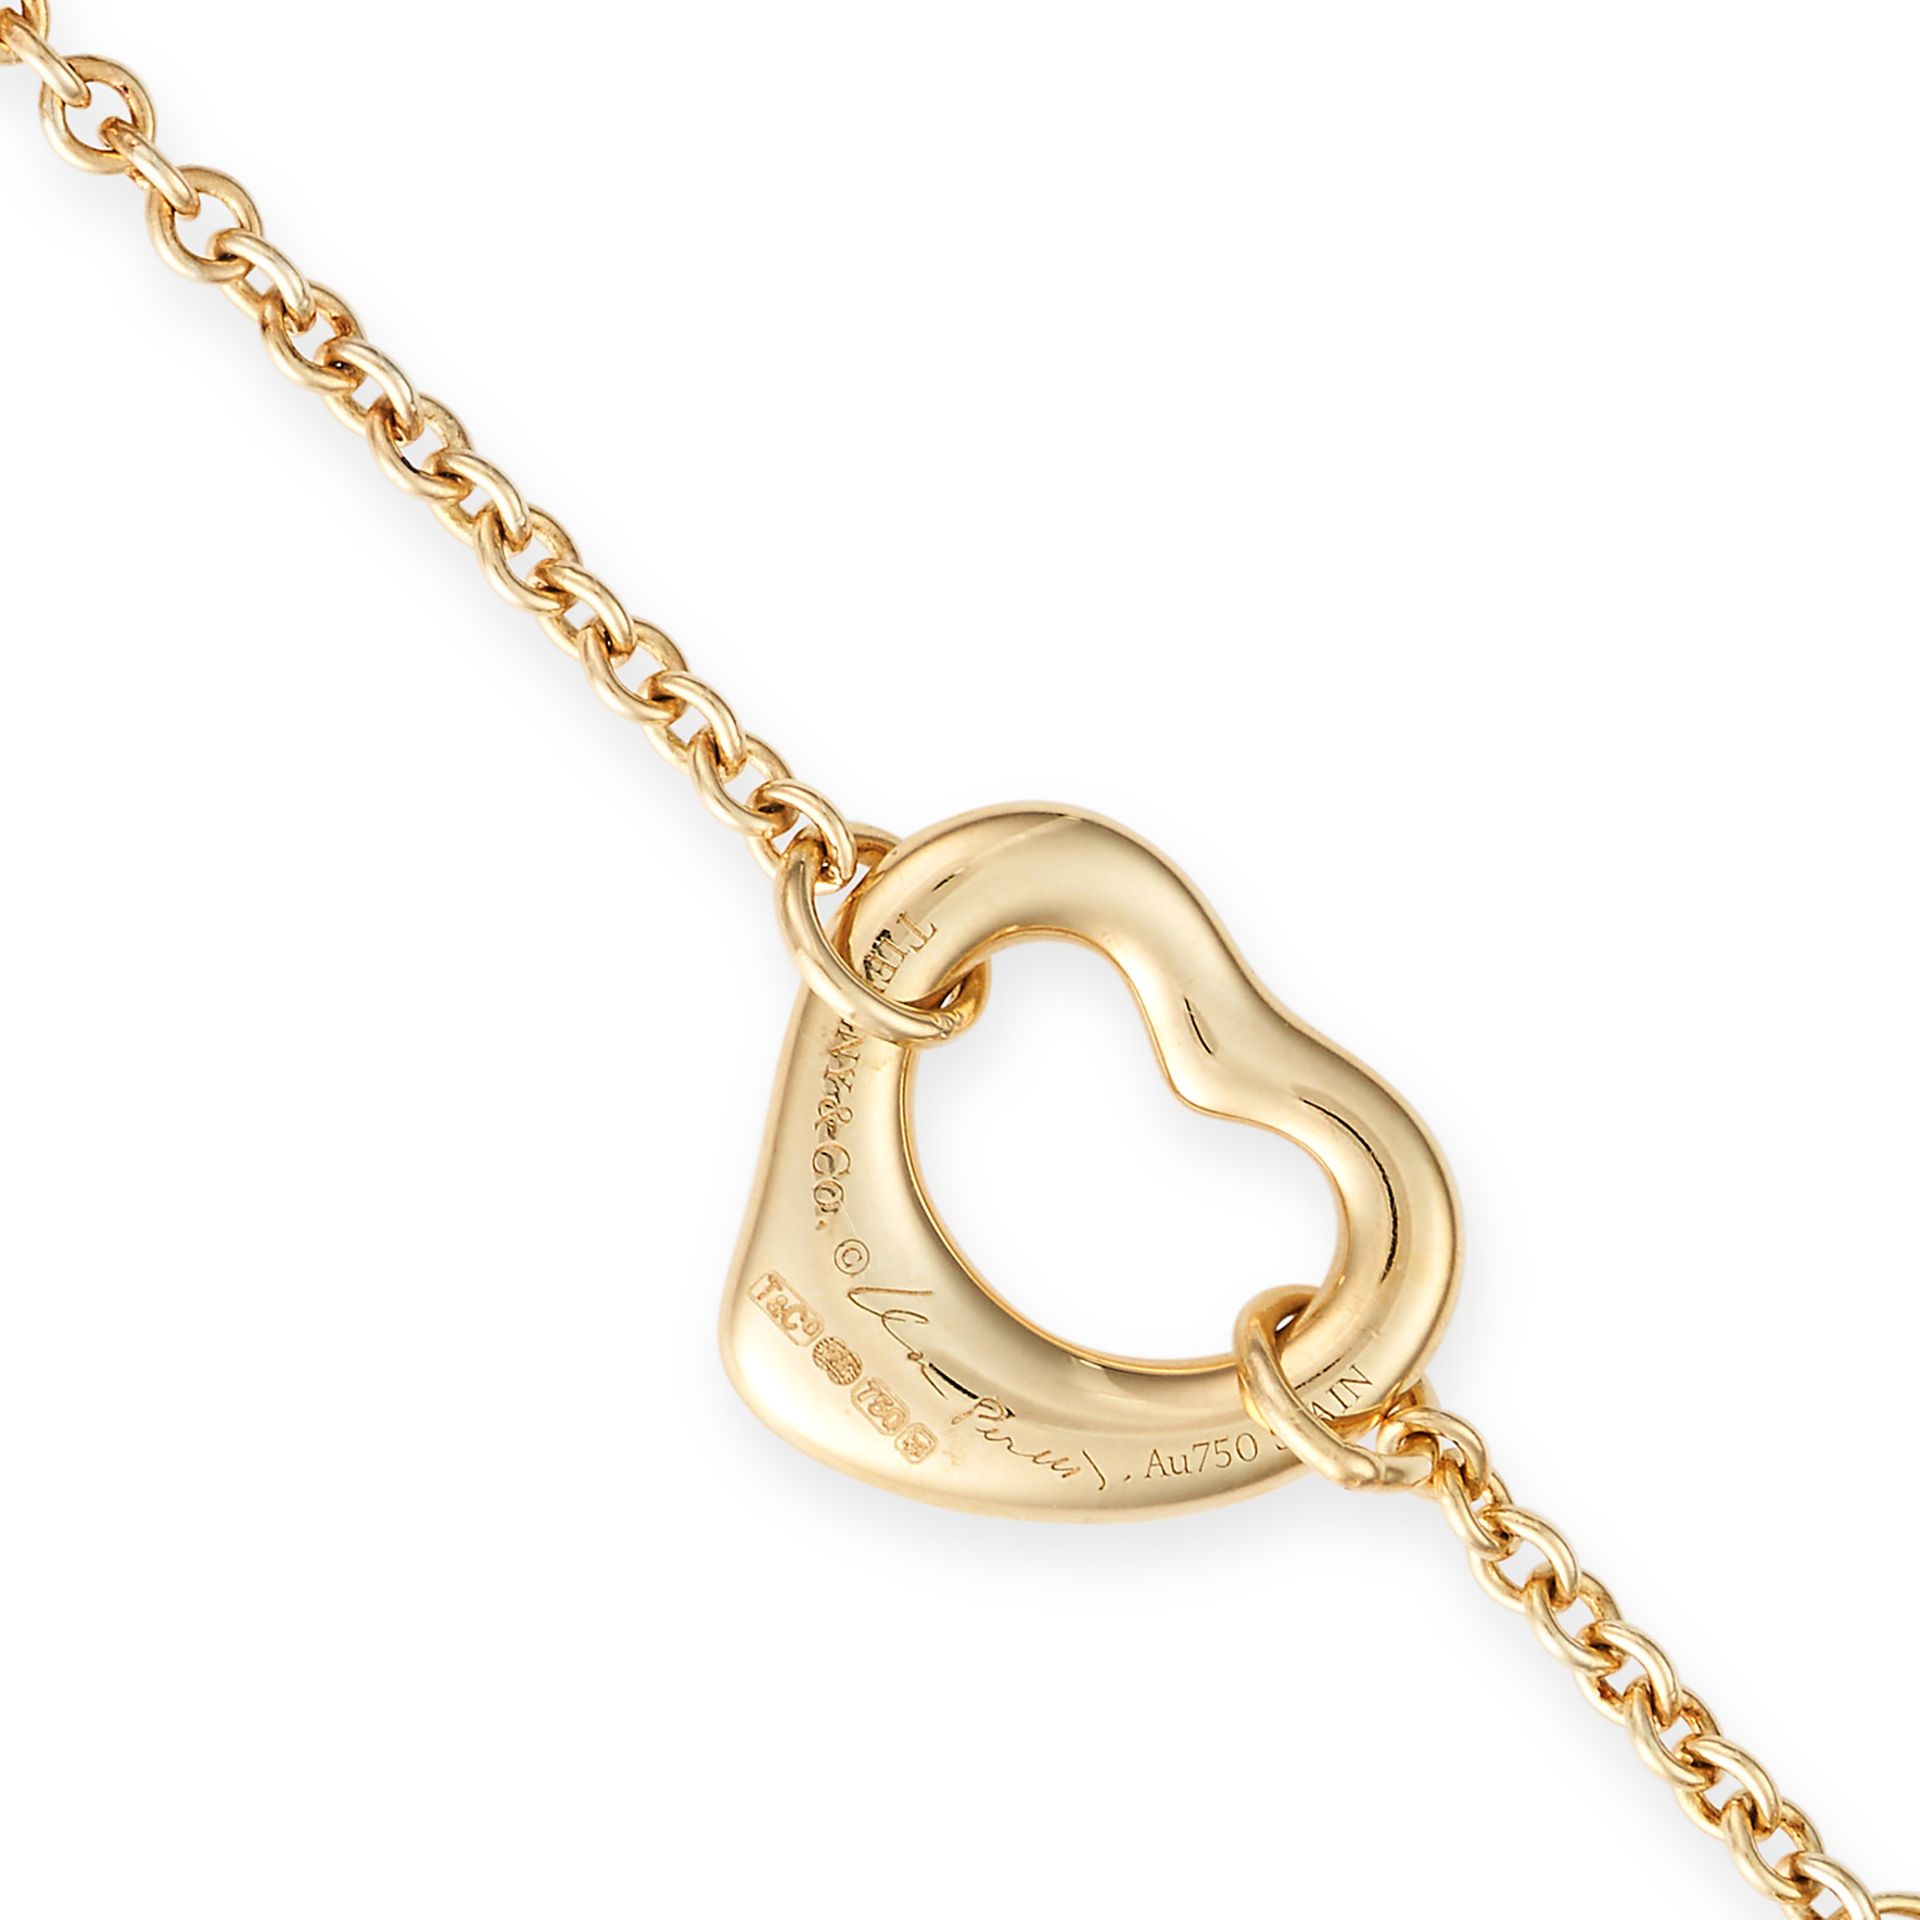 ELSA PERETTI FOR TIFFANY & CO., AN OPEN HEART BRACELET in 18ct yellow gold, comprising a trace ch... - Bild 2 aus 2